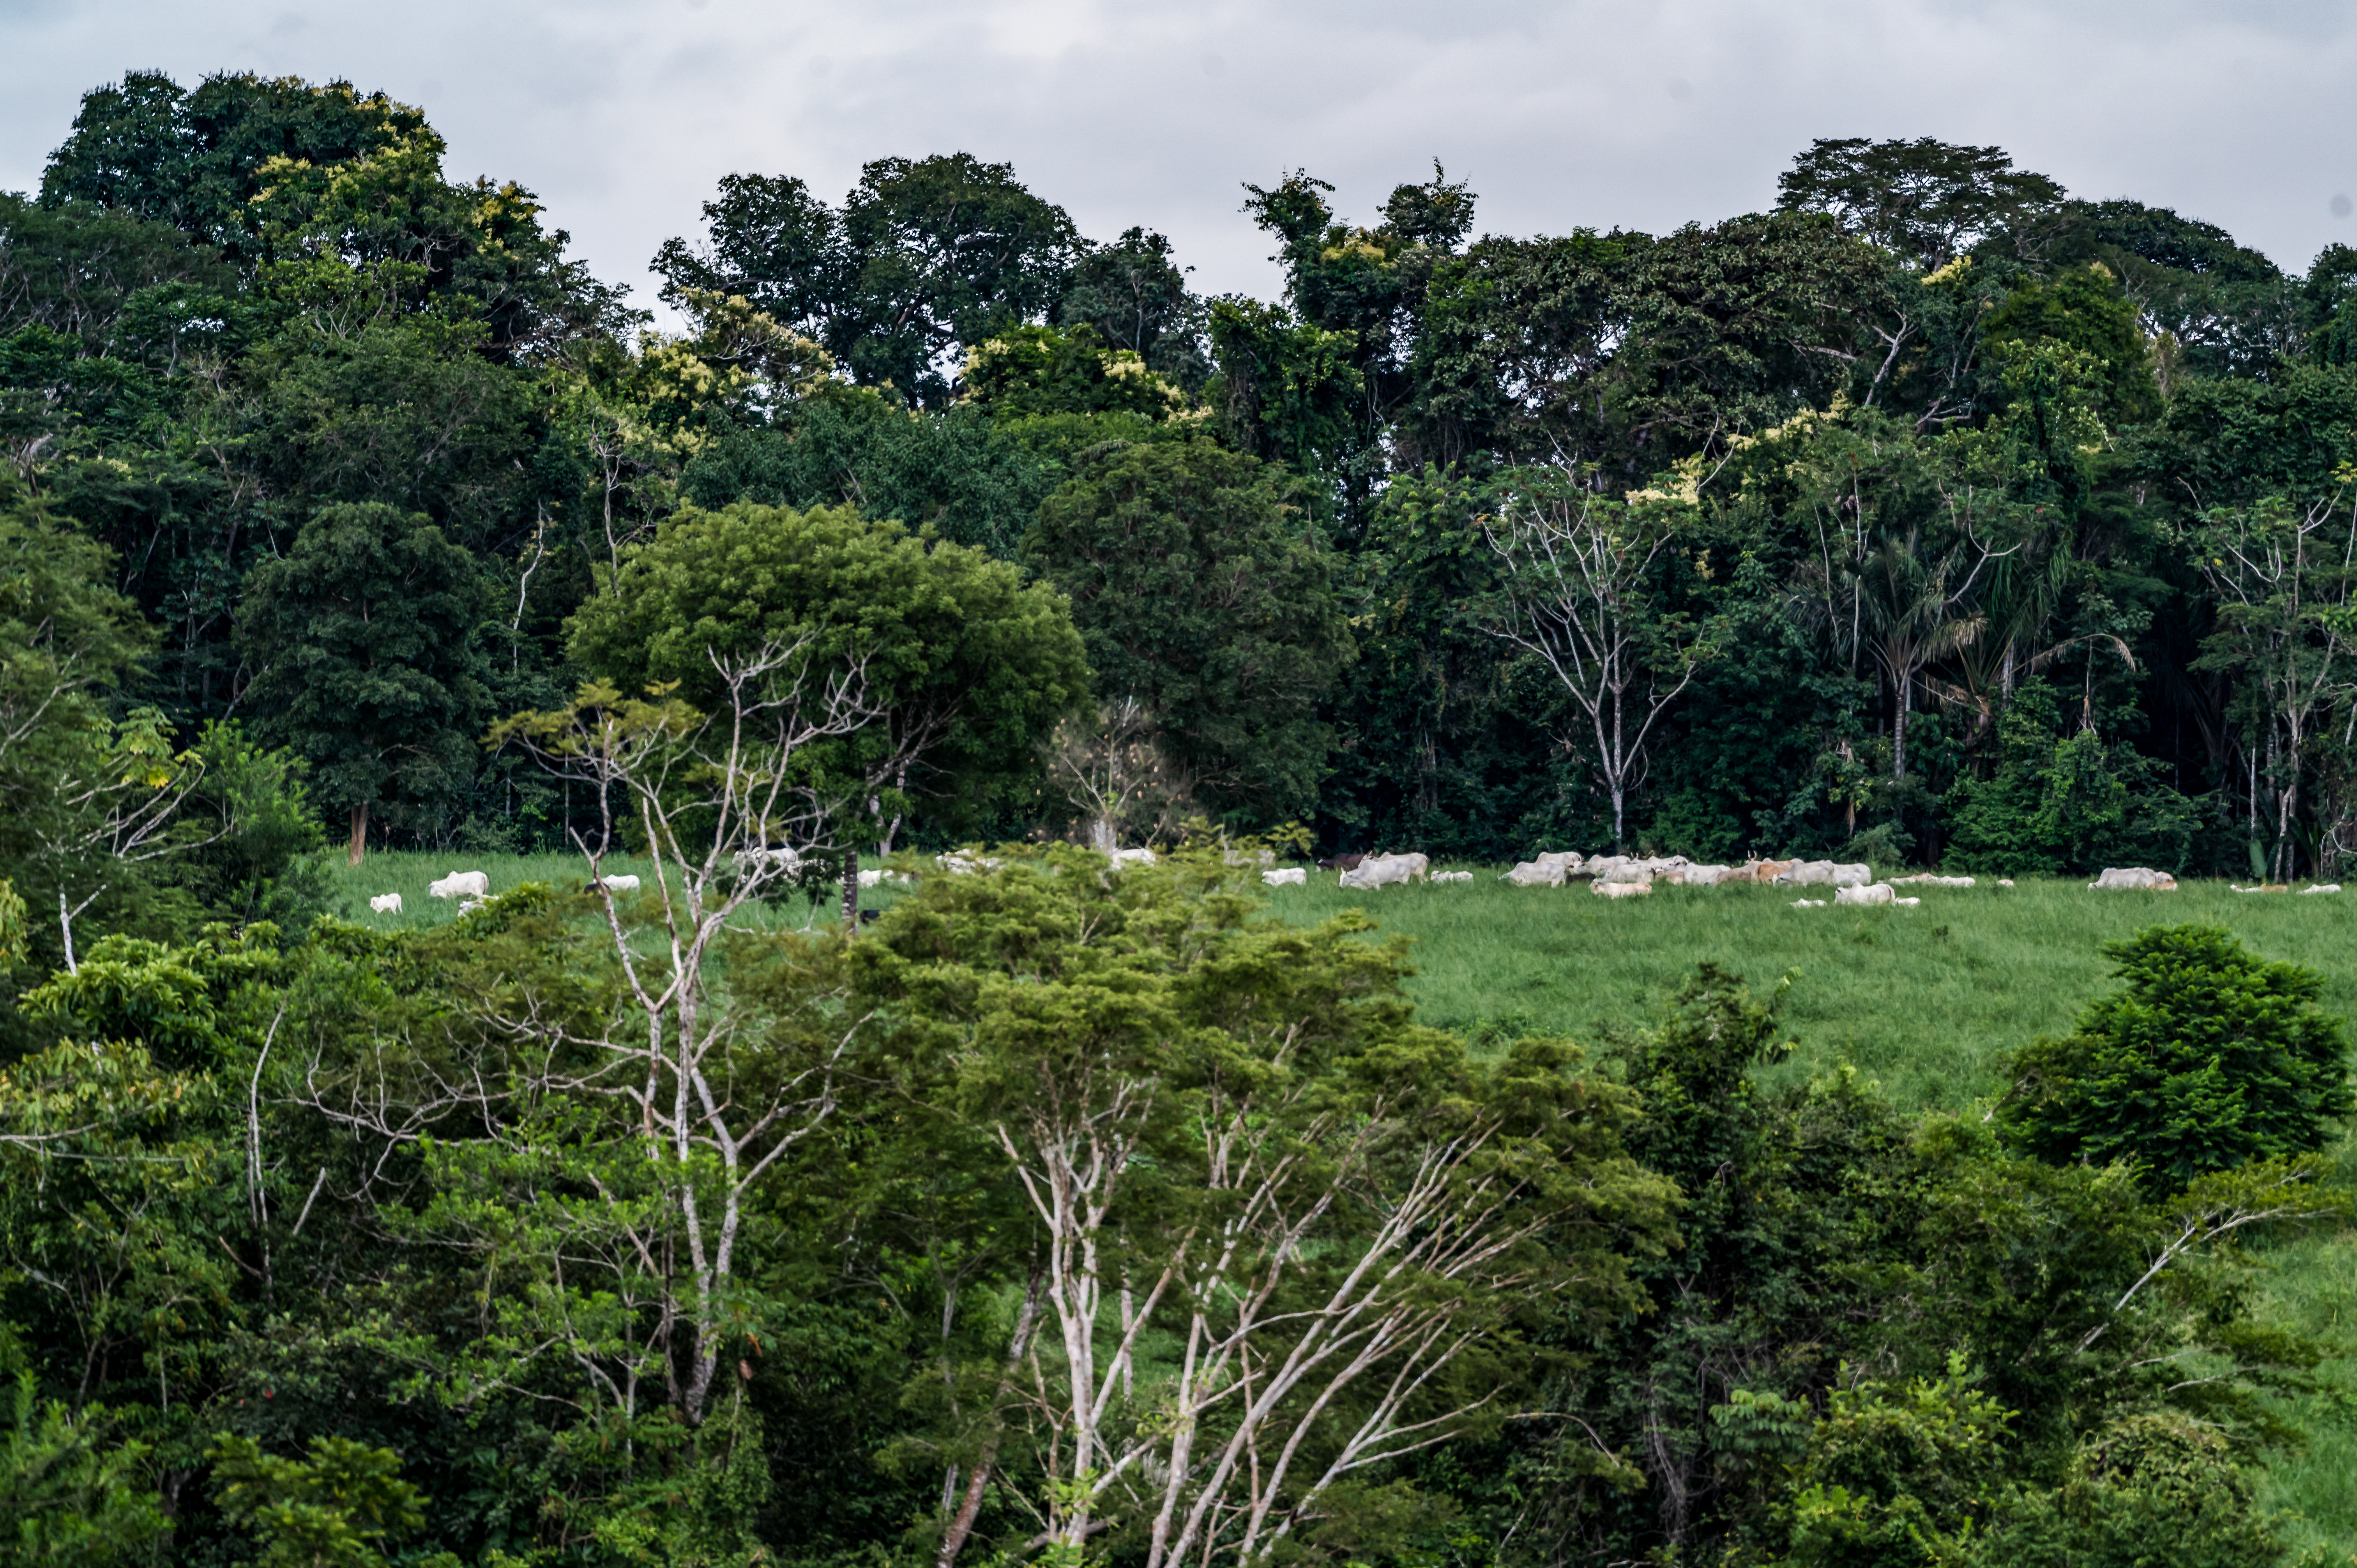 Cattle in the forest frontier of Brazil - traceable beef